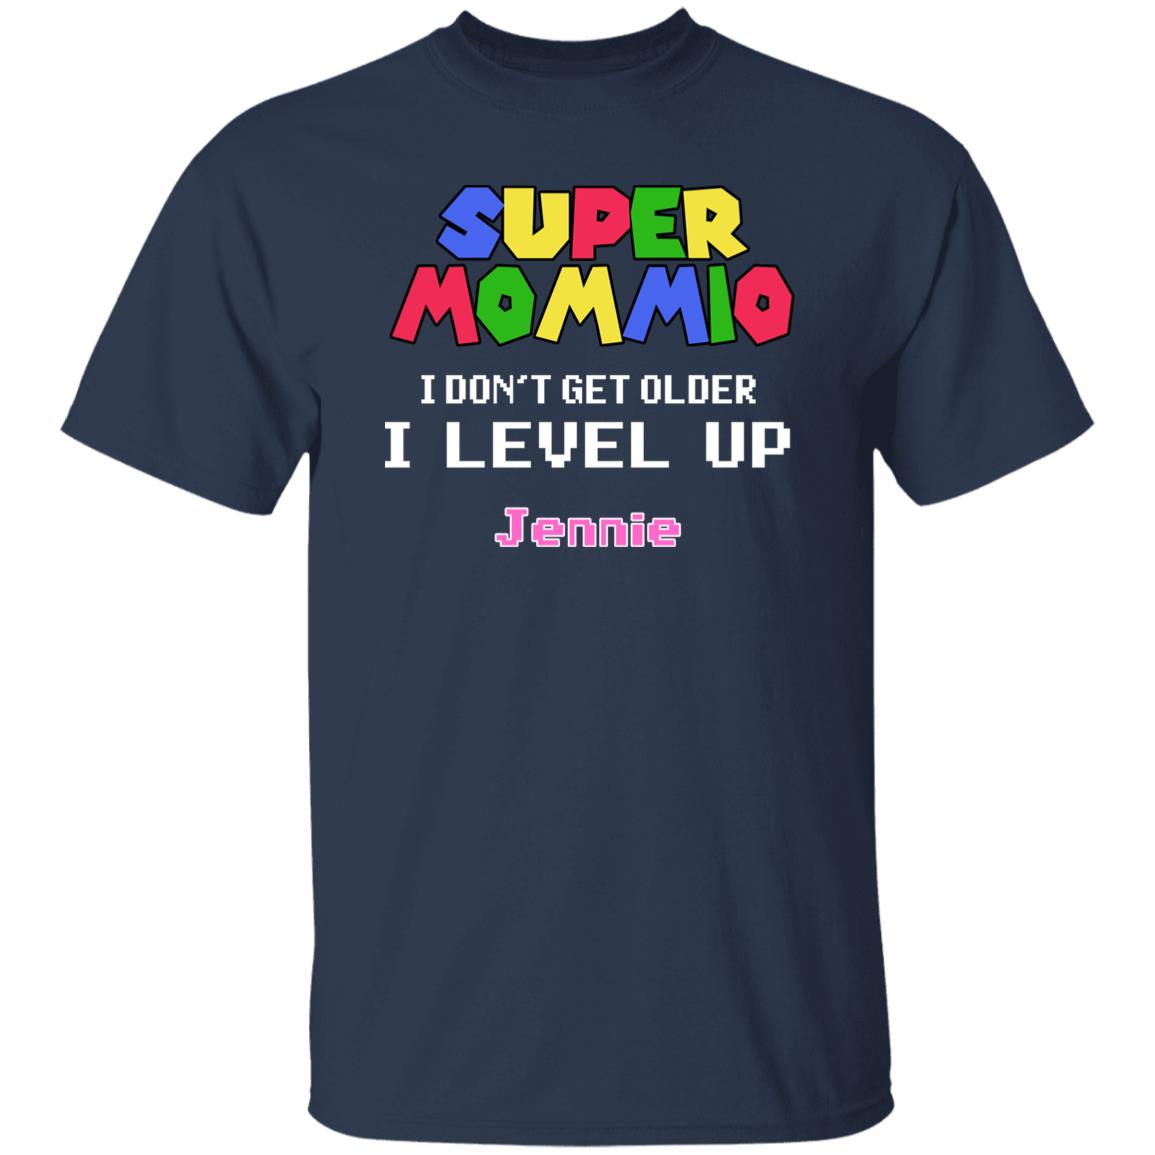 Personalized T Shirt - Super Mommio I Don't Get Older Funny Gifts for Mom